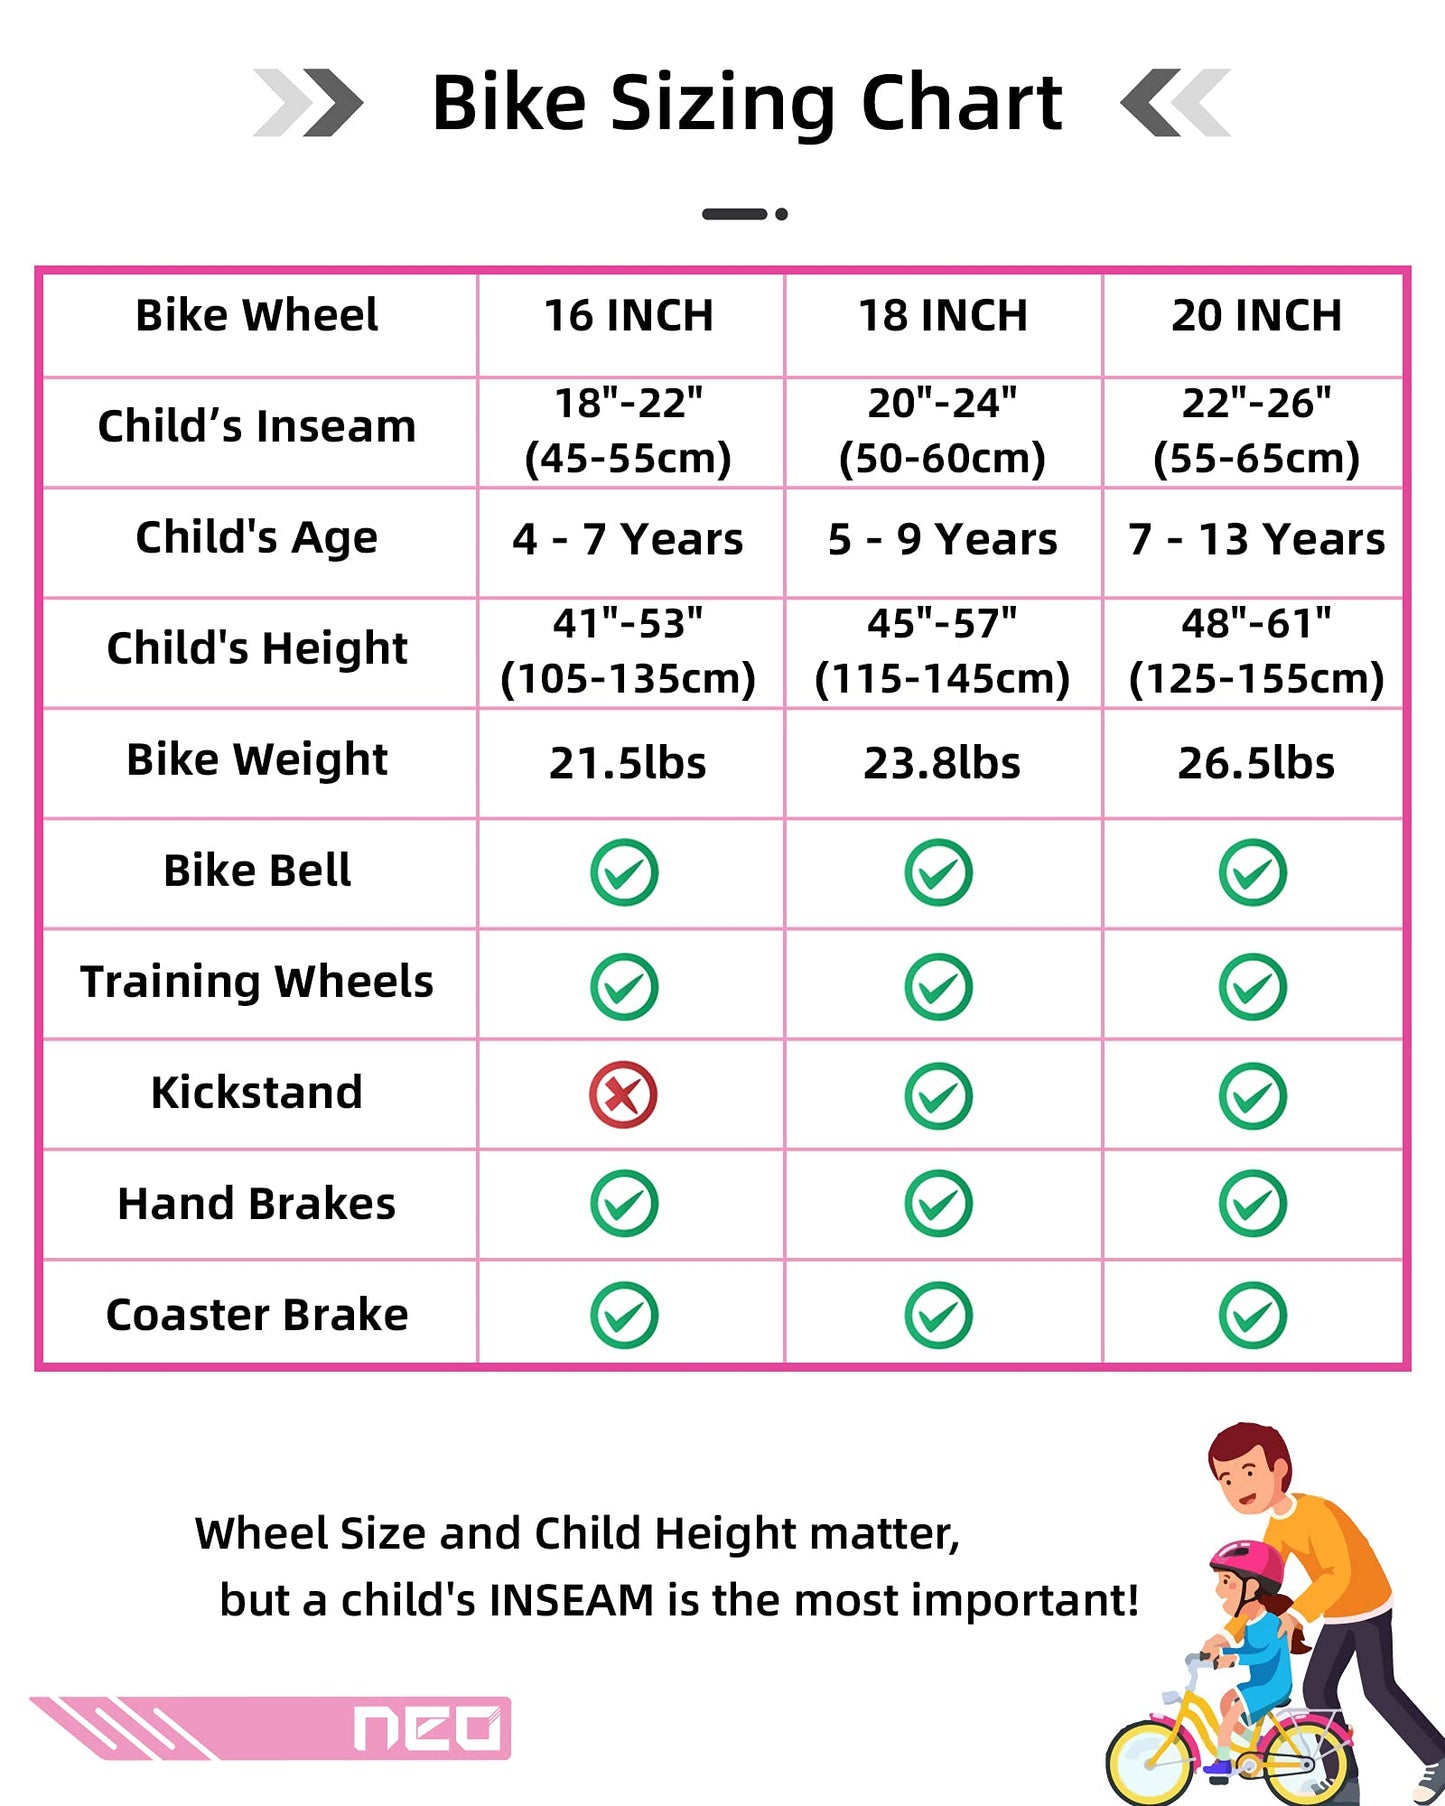 JOYSTAR 20 Inch Girls Bike with Training Wheels for 7-12 Years Old Children 20" Kids Bikes Kids Mountain Bicycle for Early Rider Kids' Bicycles Pink